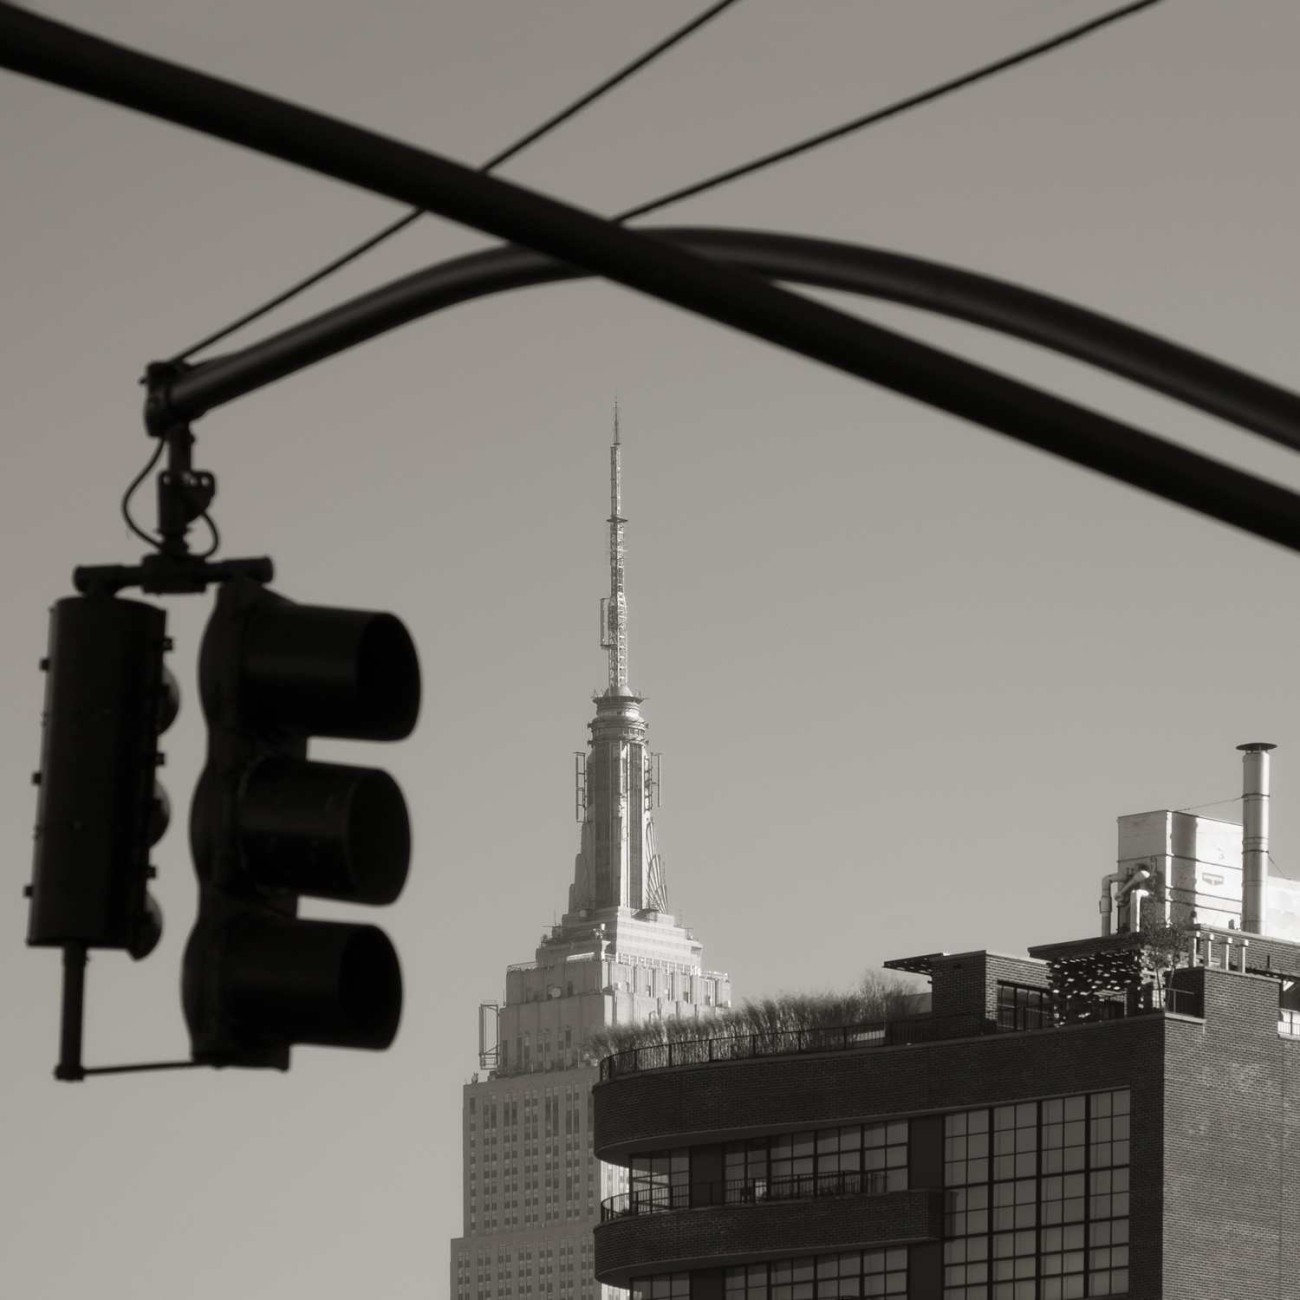 Empire State Building and traffic light silhouette, New York, 20